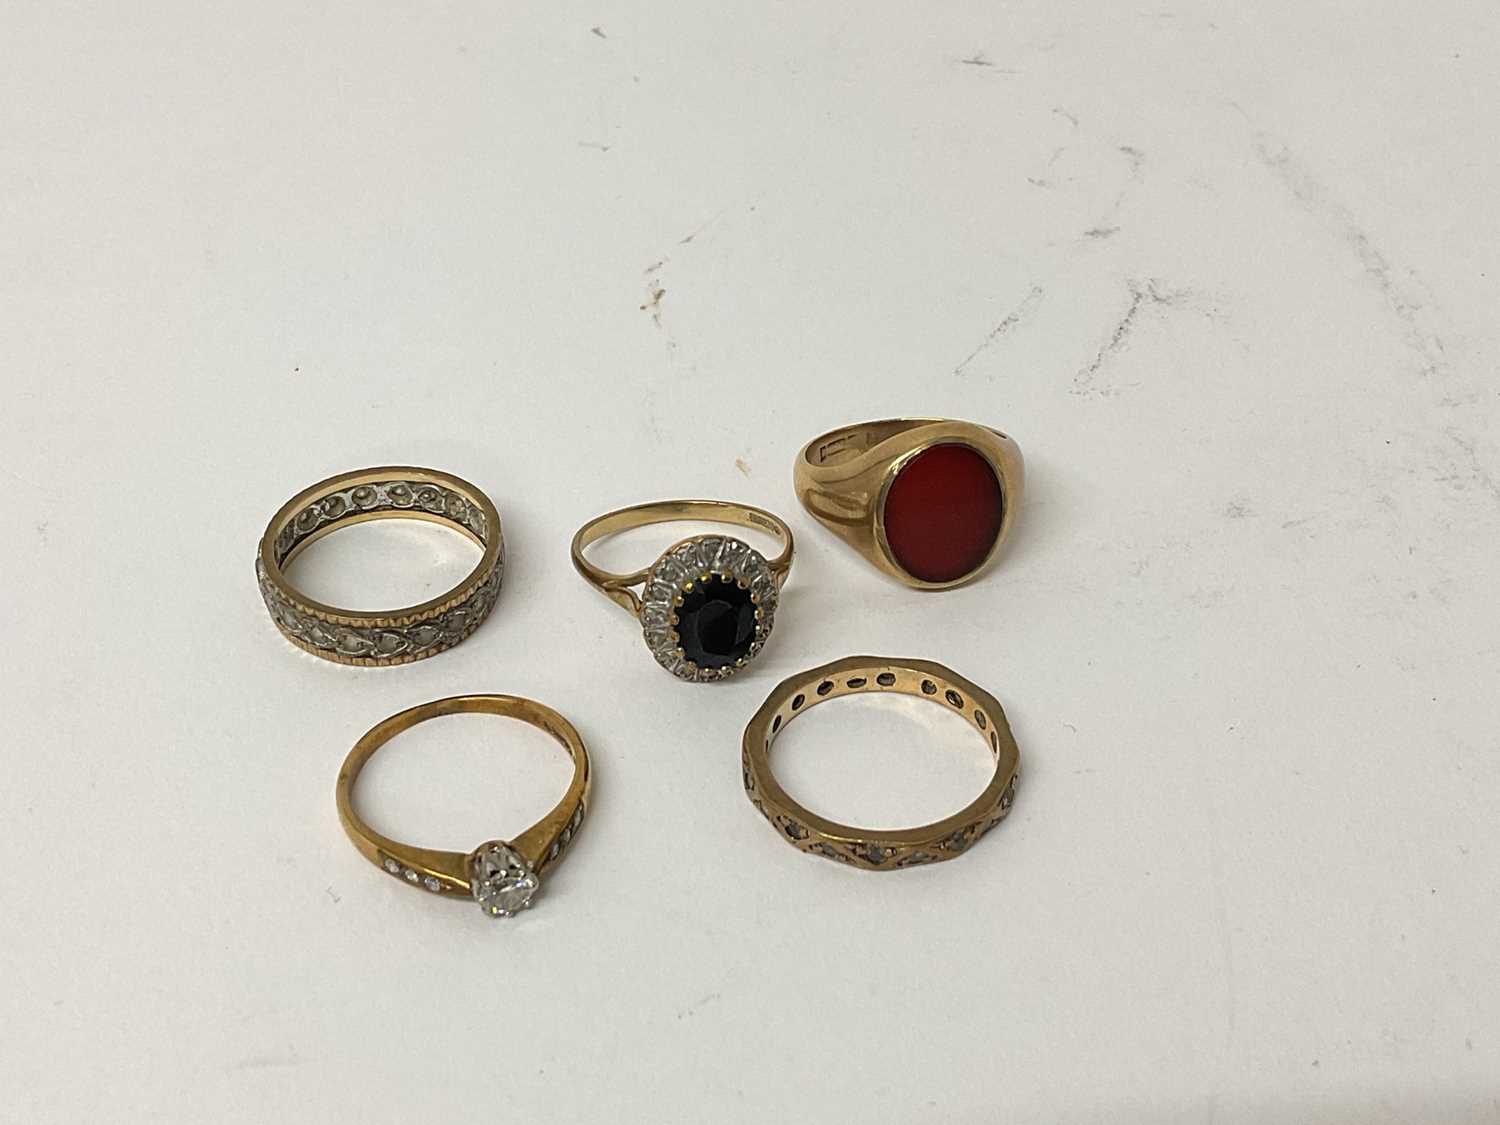 Five 9ct gold rings to include a diamond single stone ring, sapphire and diamond cluster ring, signe